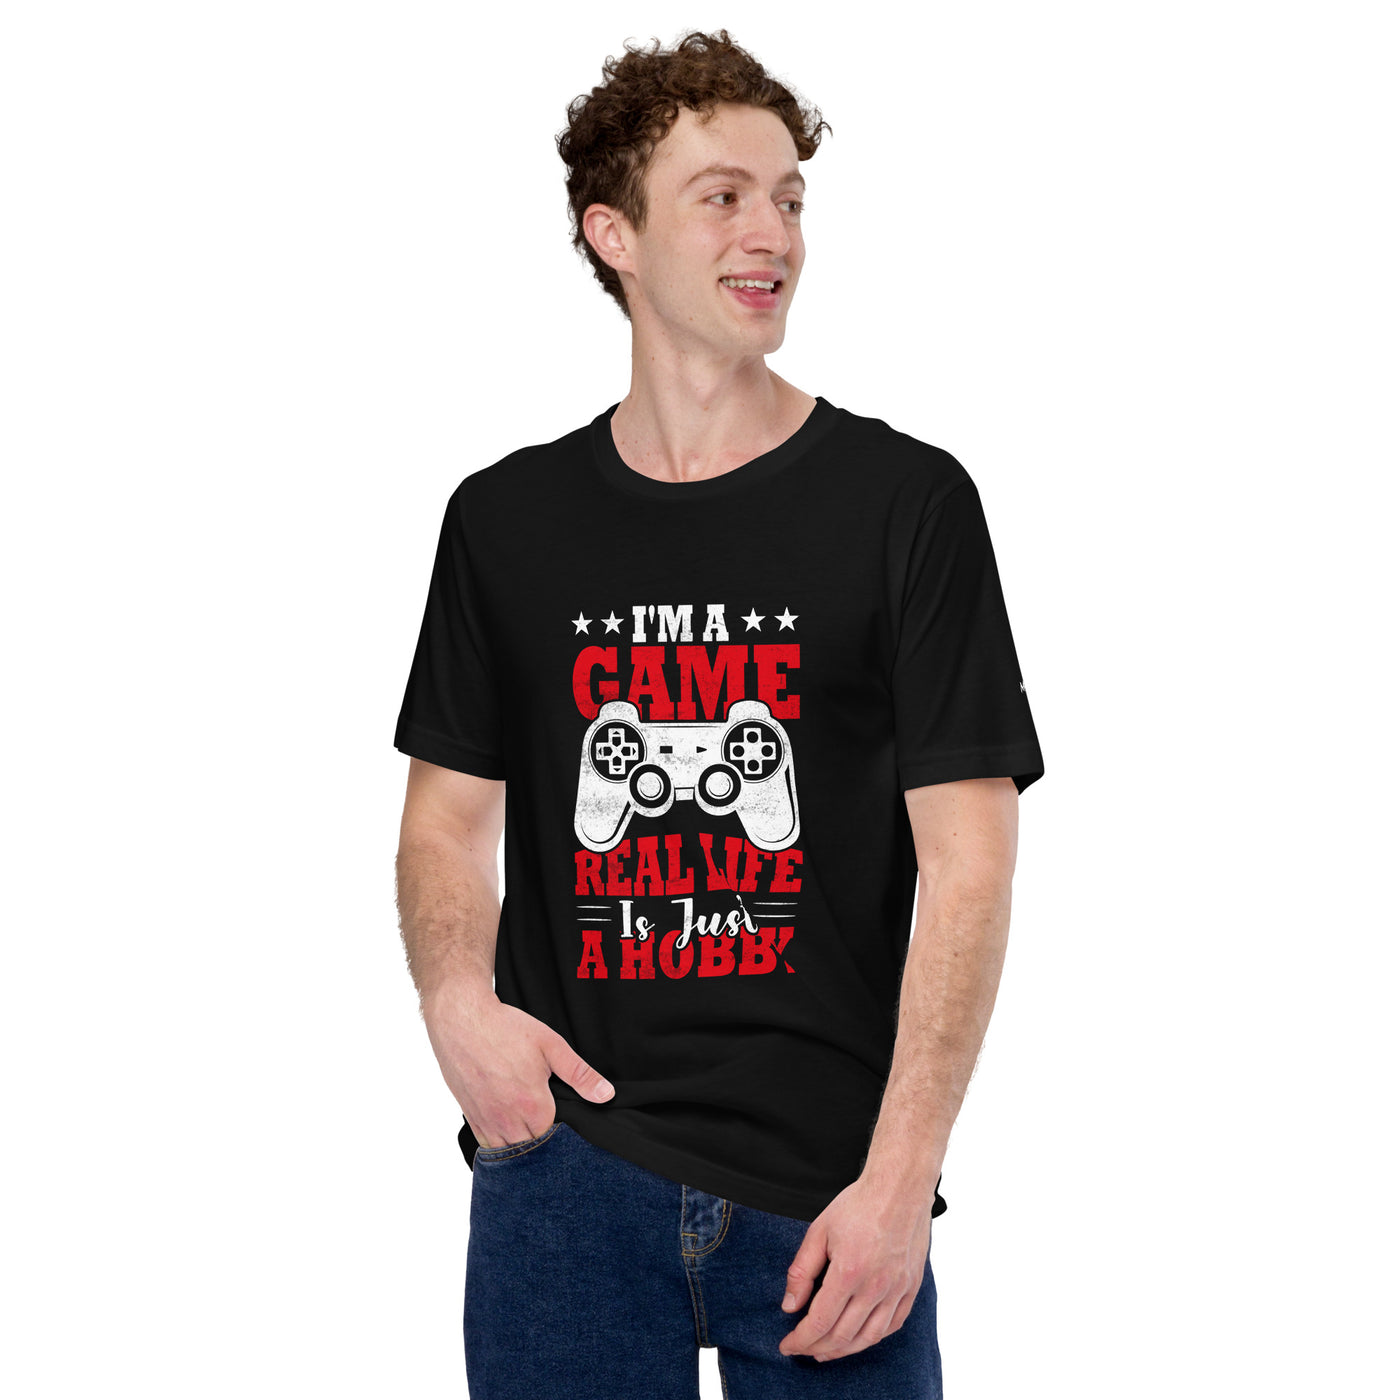 I am a Game; Real life is just a Hobby - Unisex t-shirt